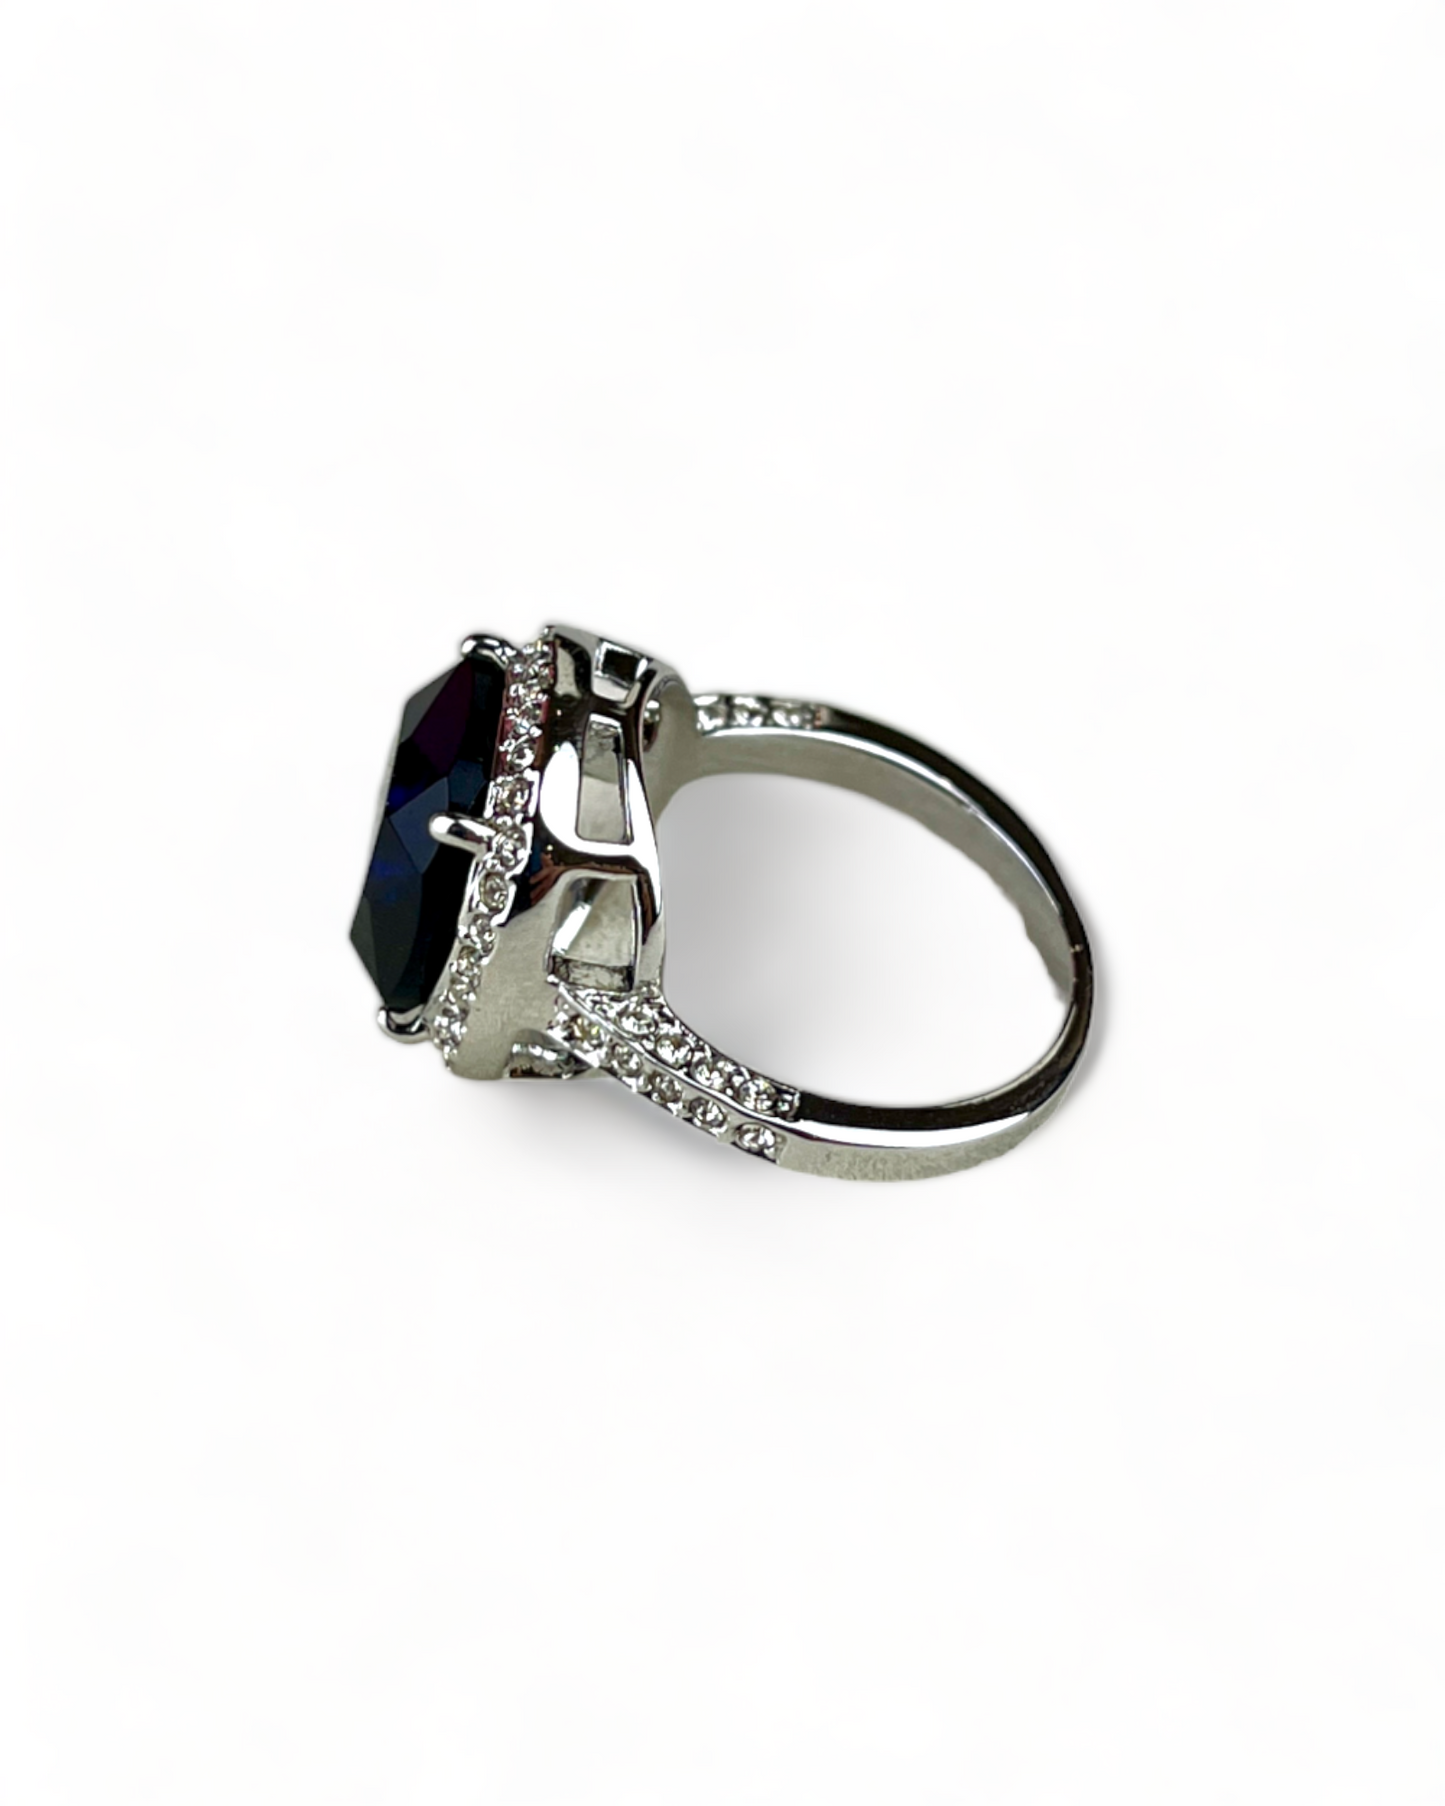 Silver Ring with Blue Stone